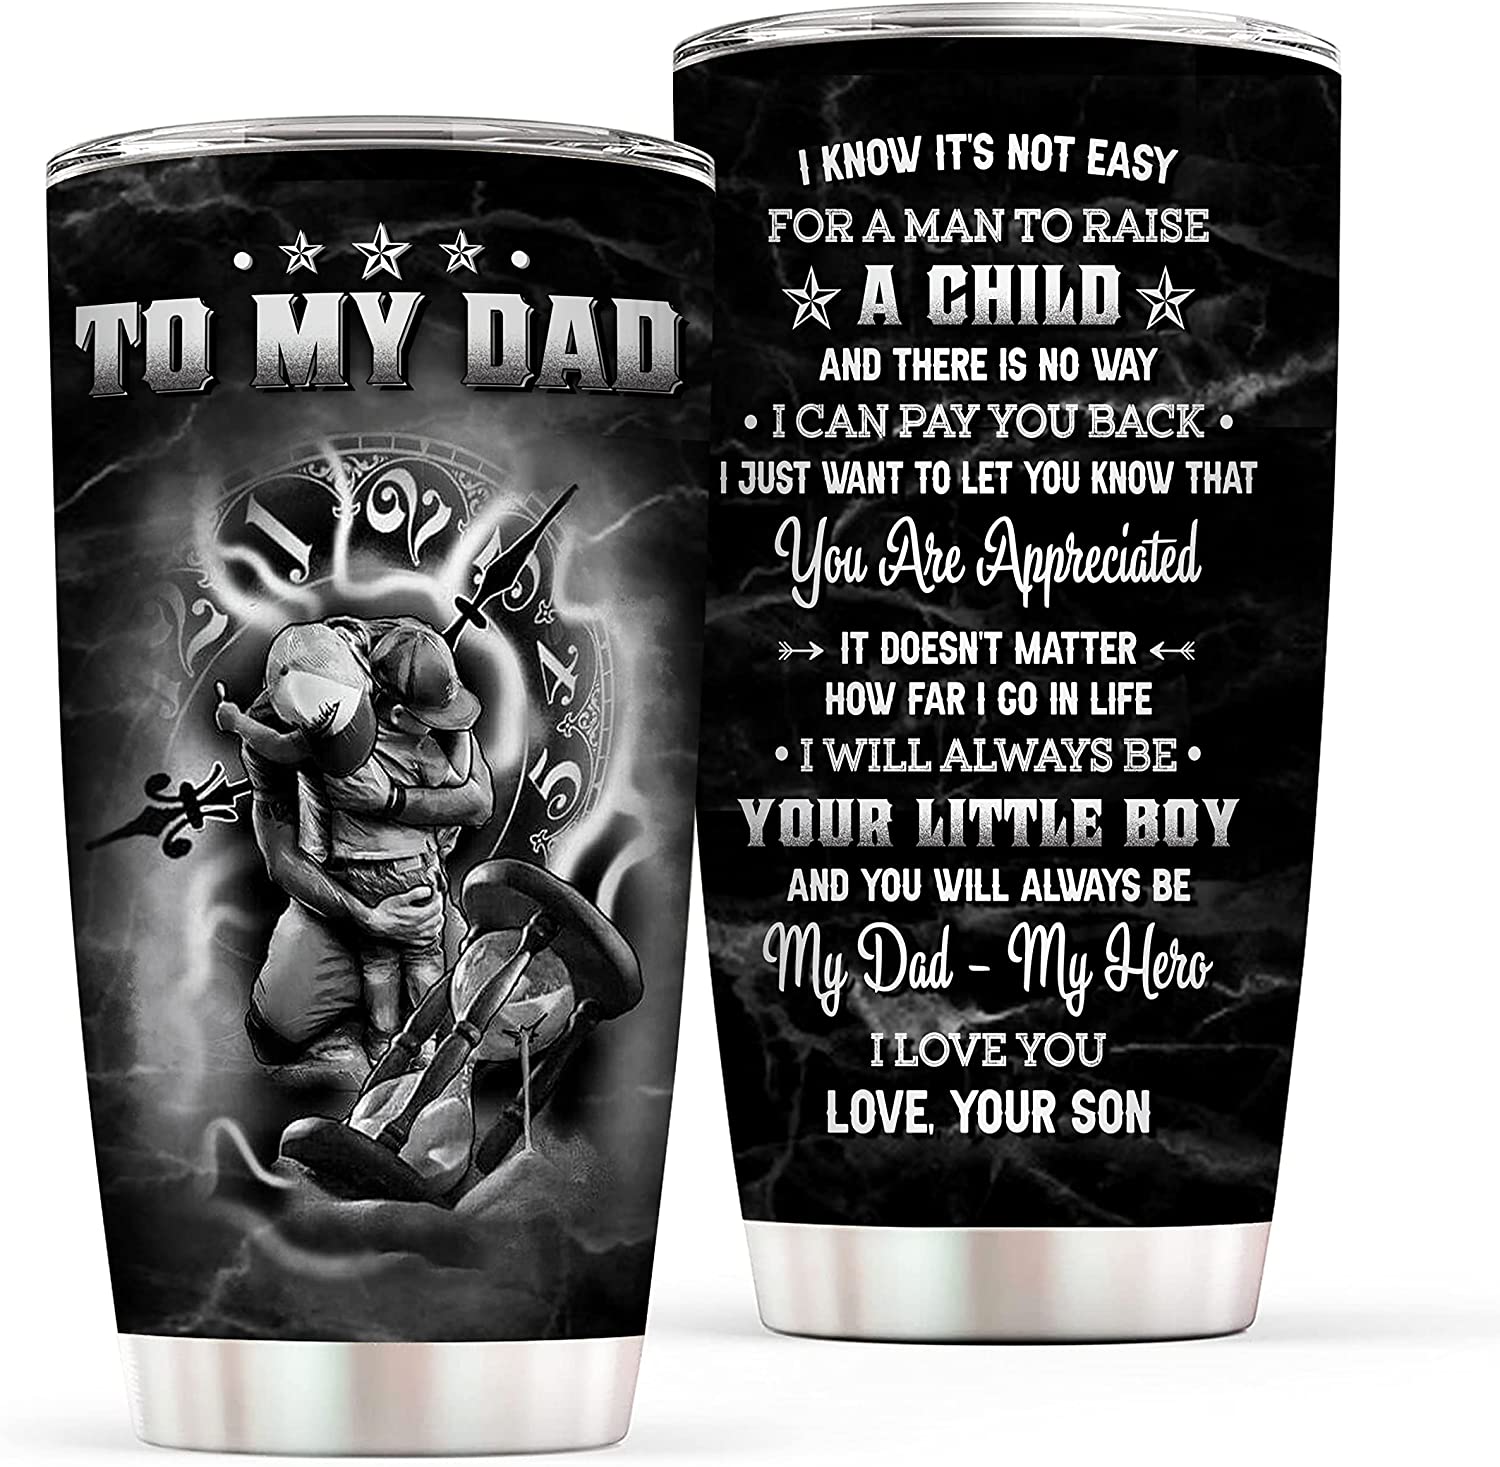 Dad Gift from Son 20oz tumbler - My Hero My Dad - Gifts for Dad on Father's Day, Birthday, Christmas